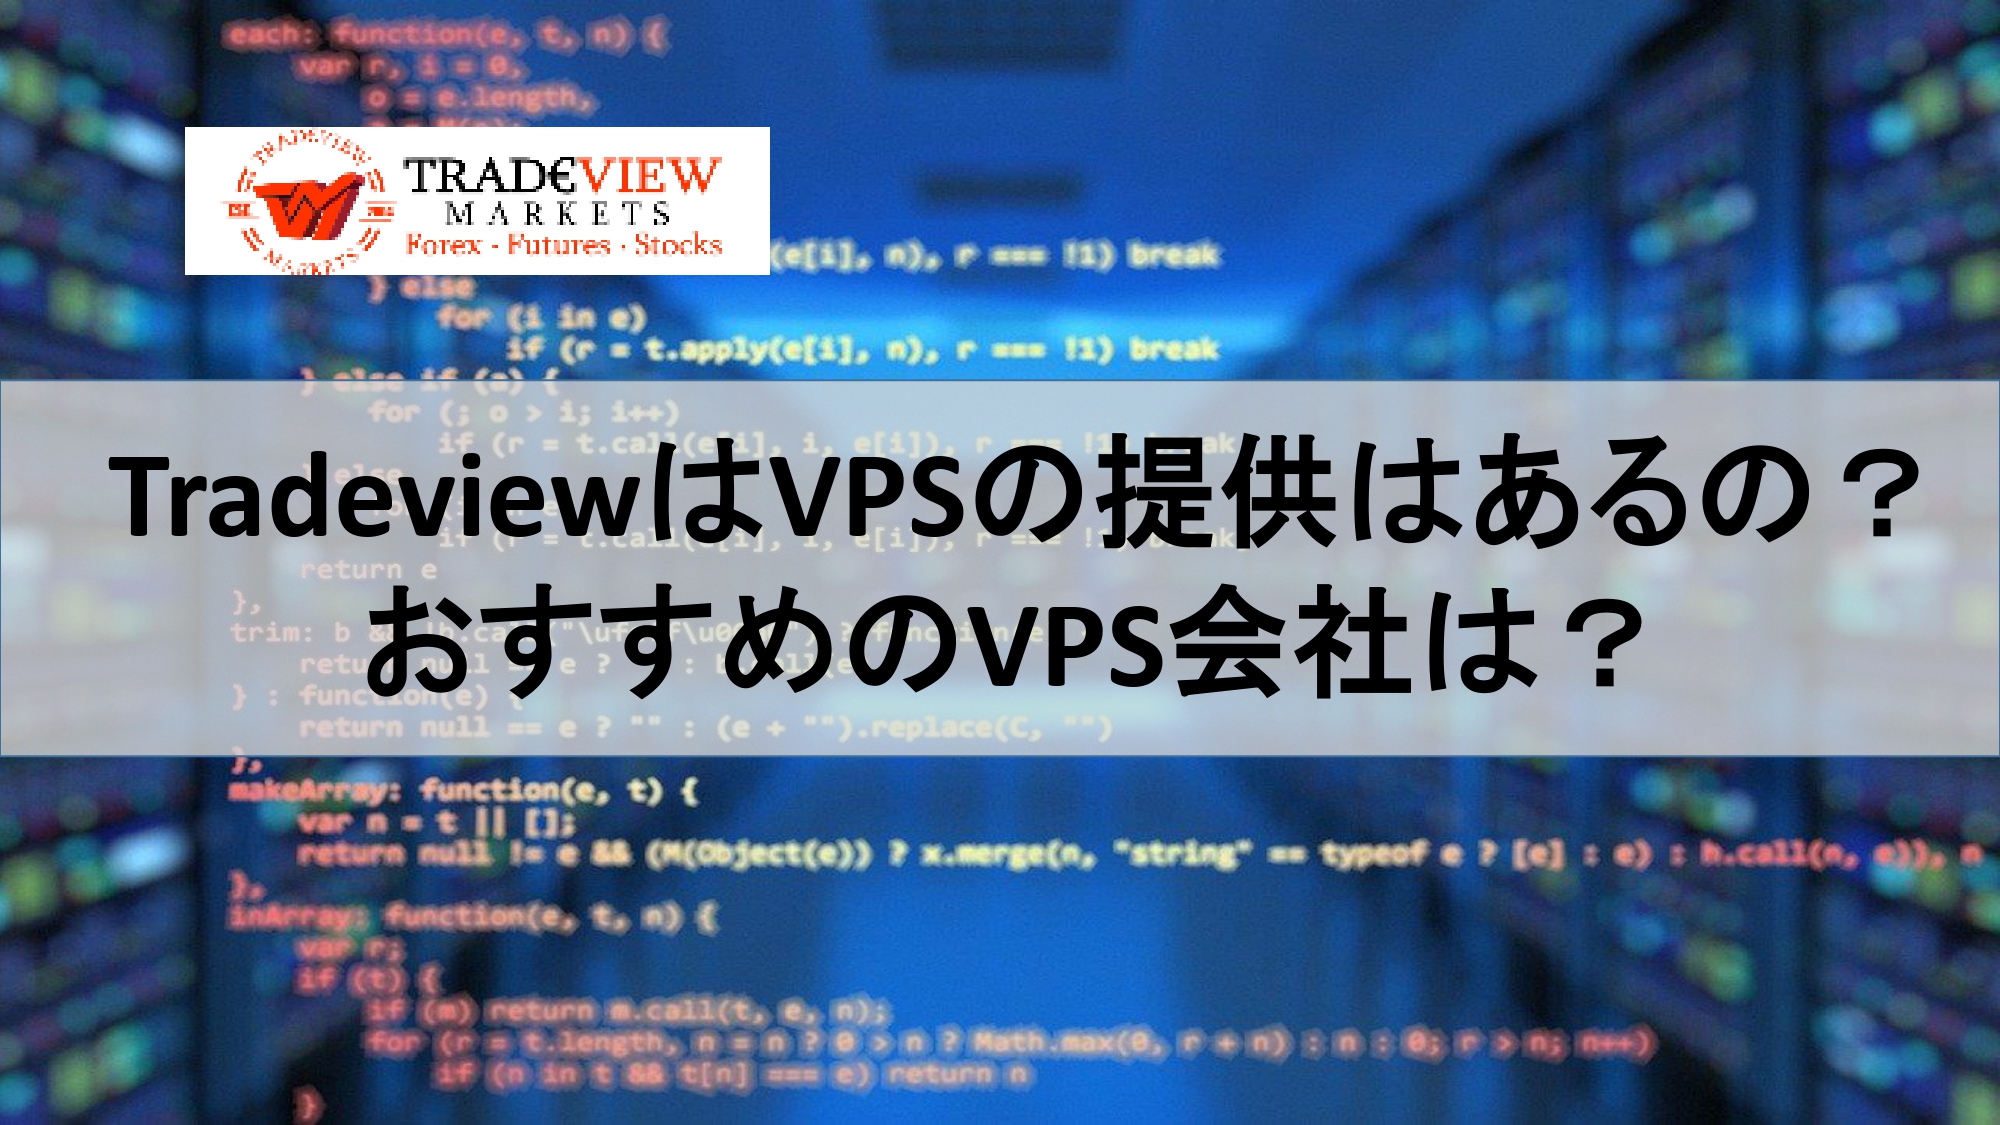 TradeviewはVPSの提供はあるの？